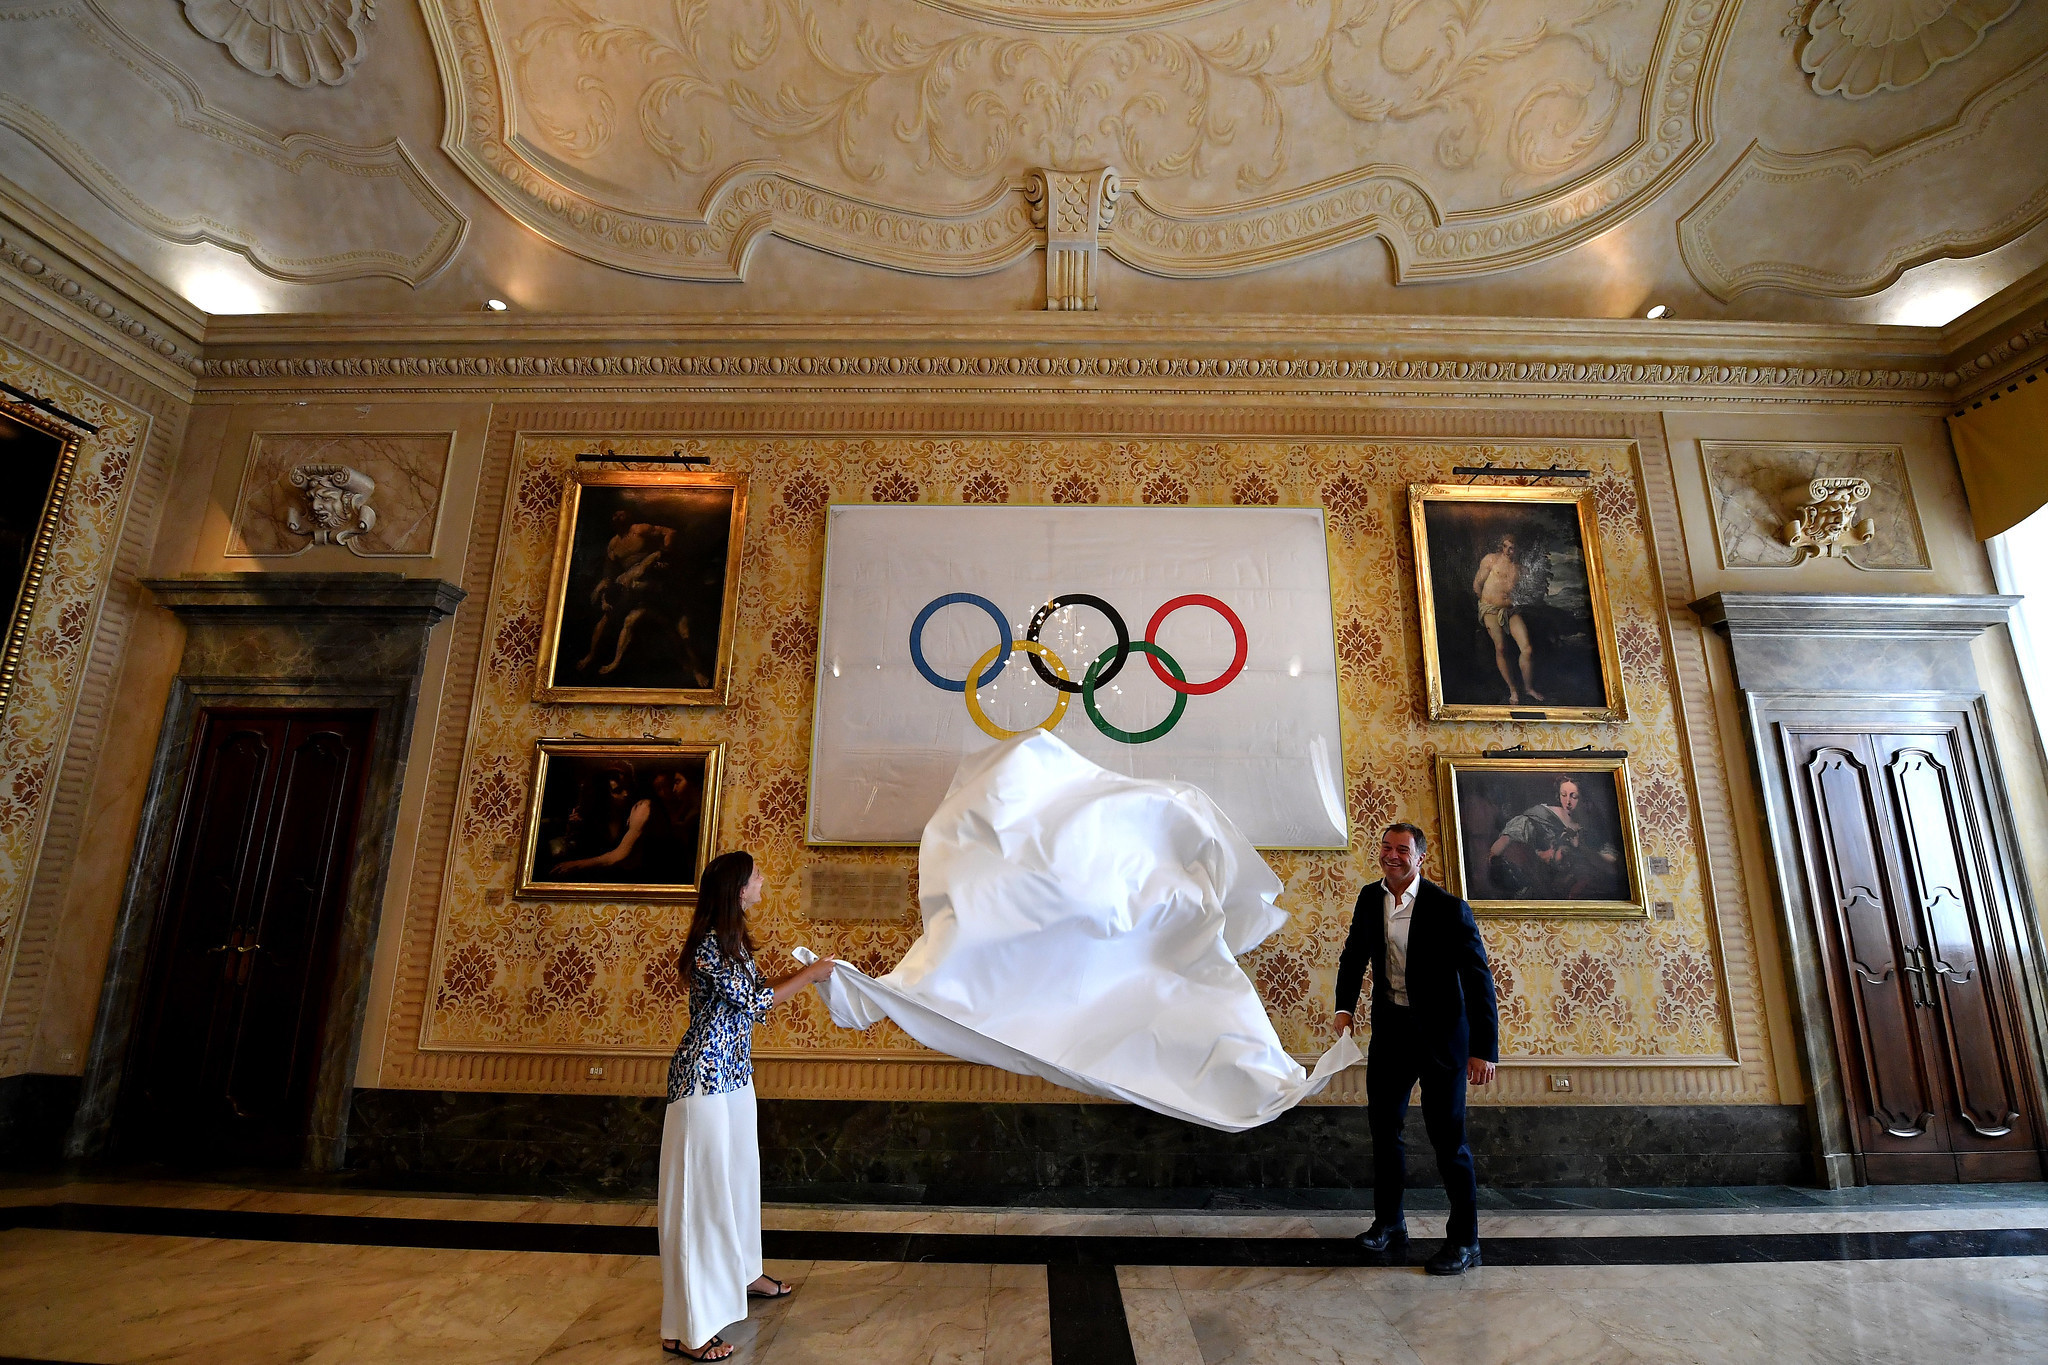 Olympic and Paralympic flags go on display at Milan City Hall for 2026 Winter Games